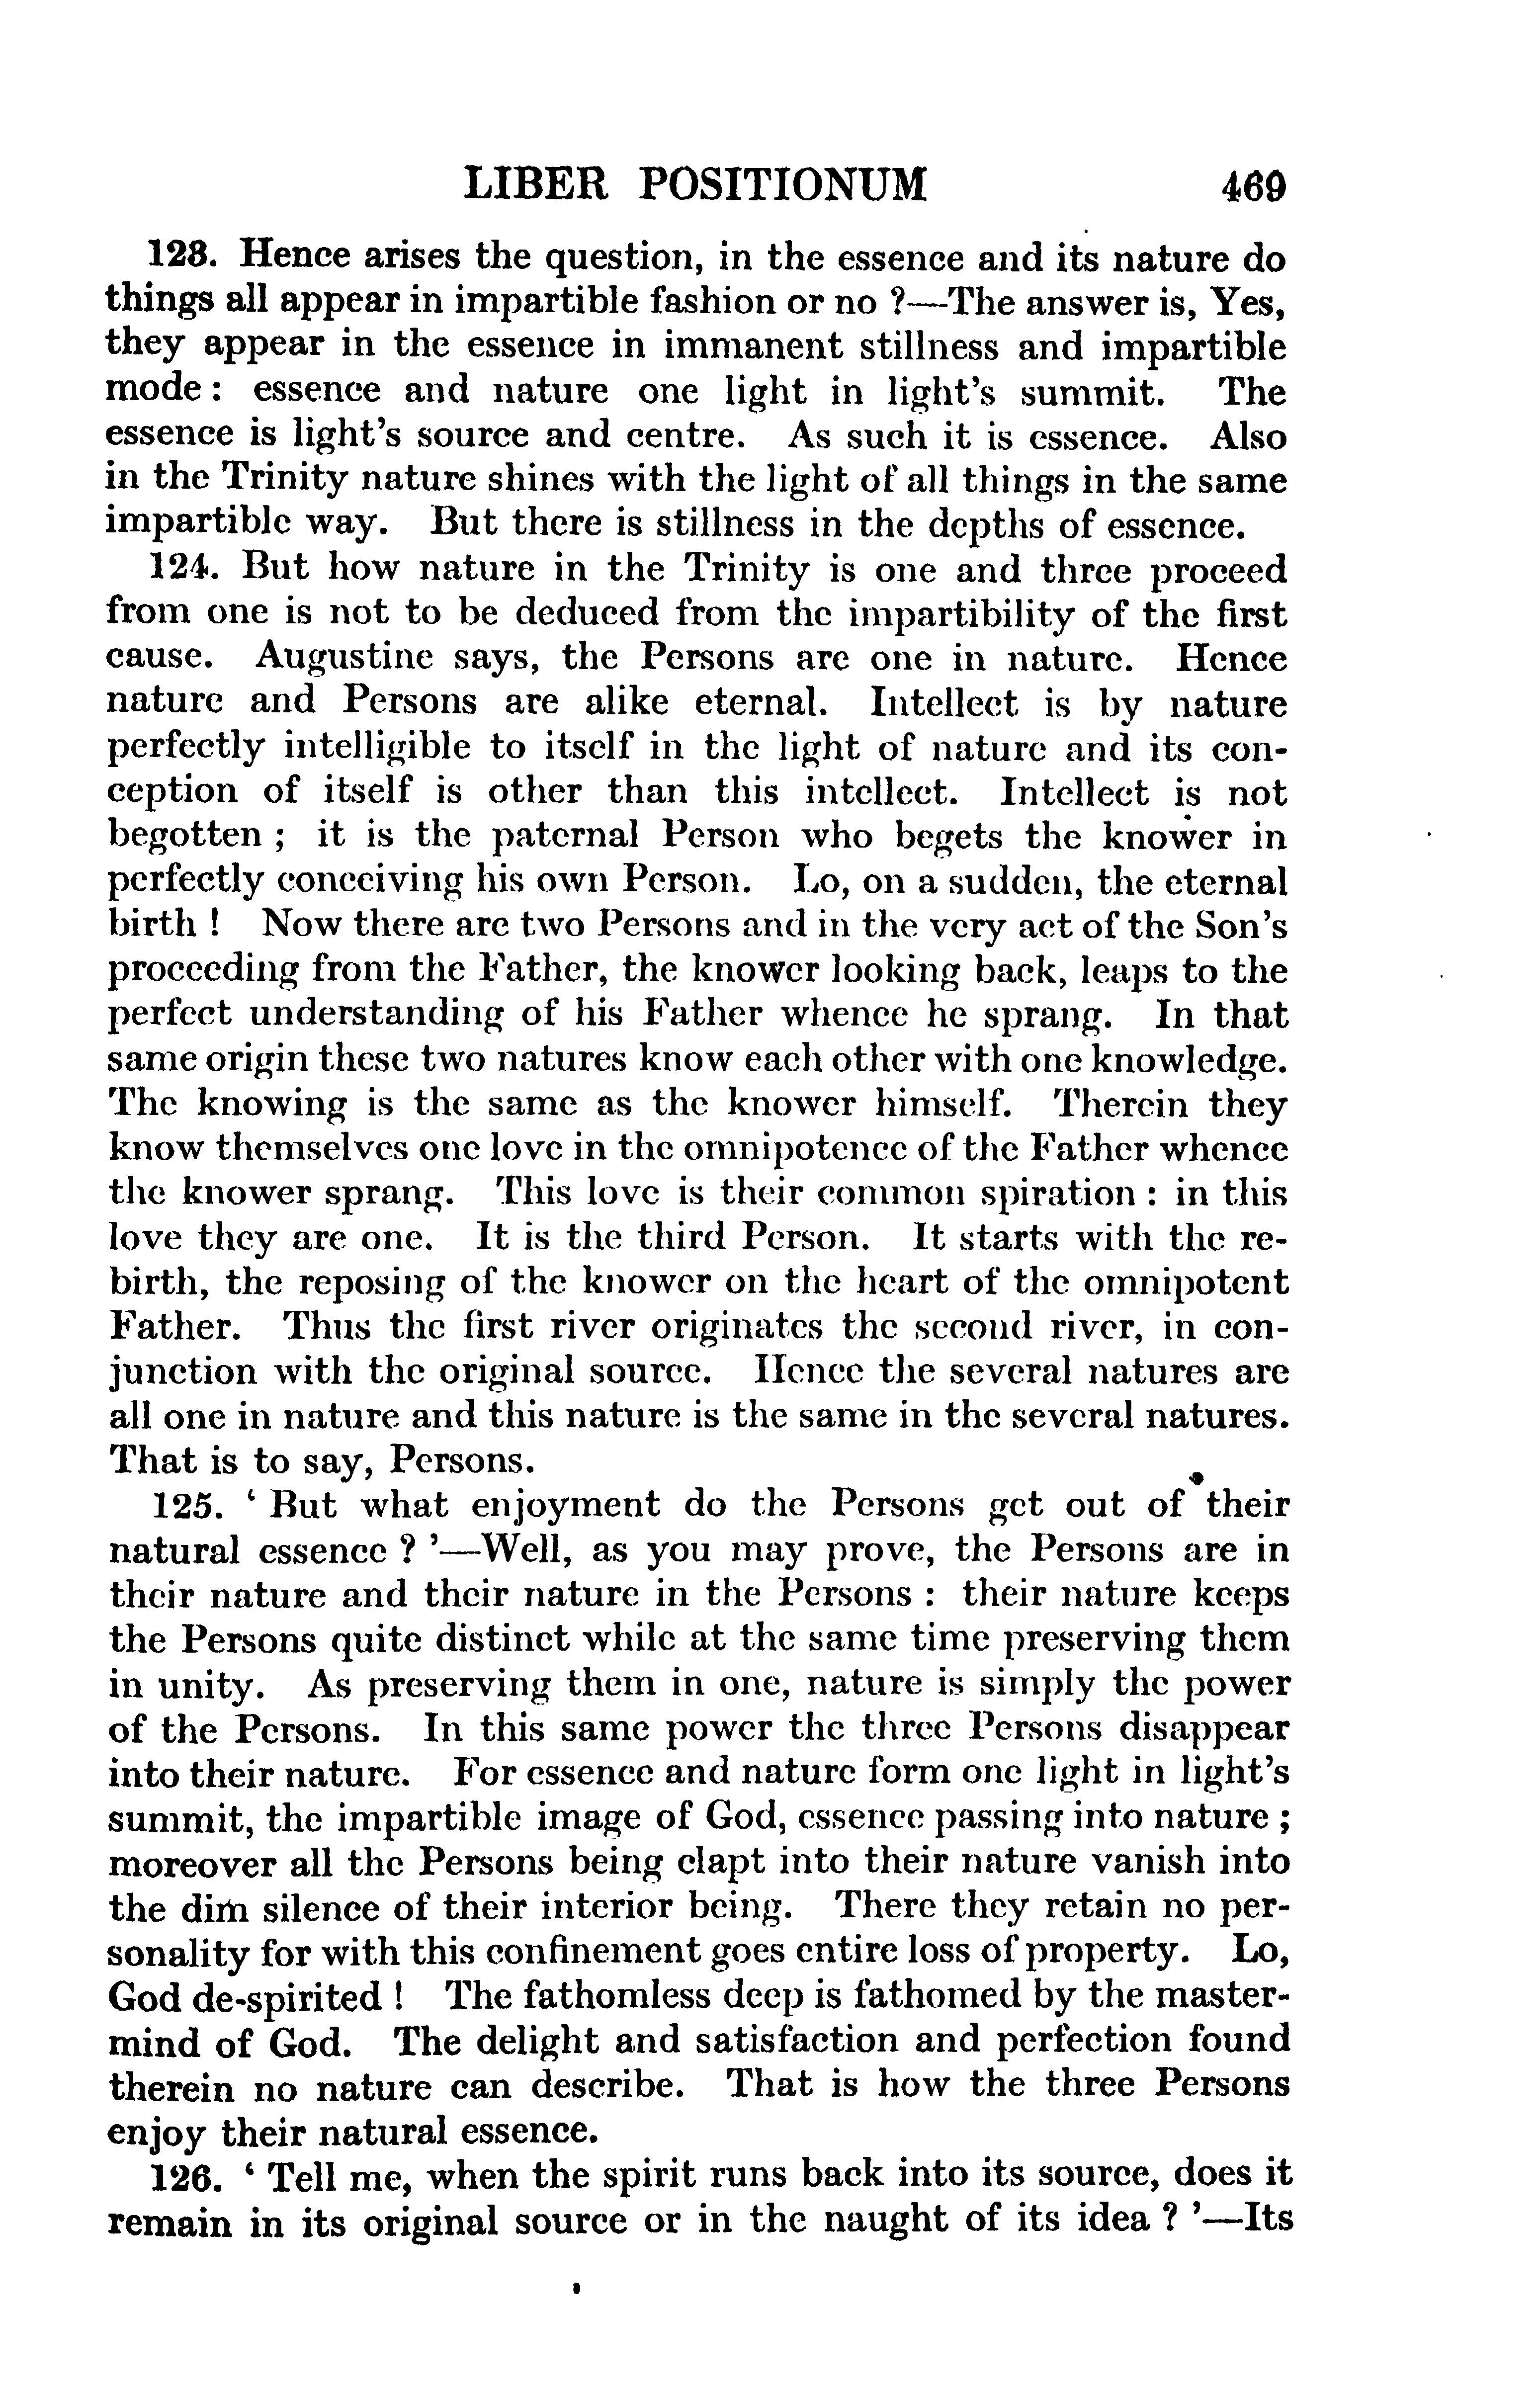 Image of page 0493